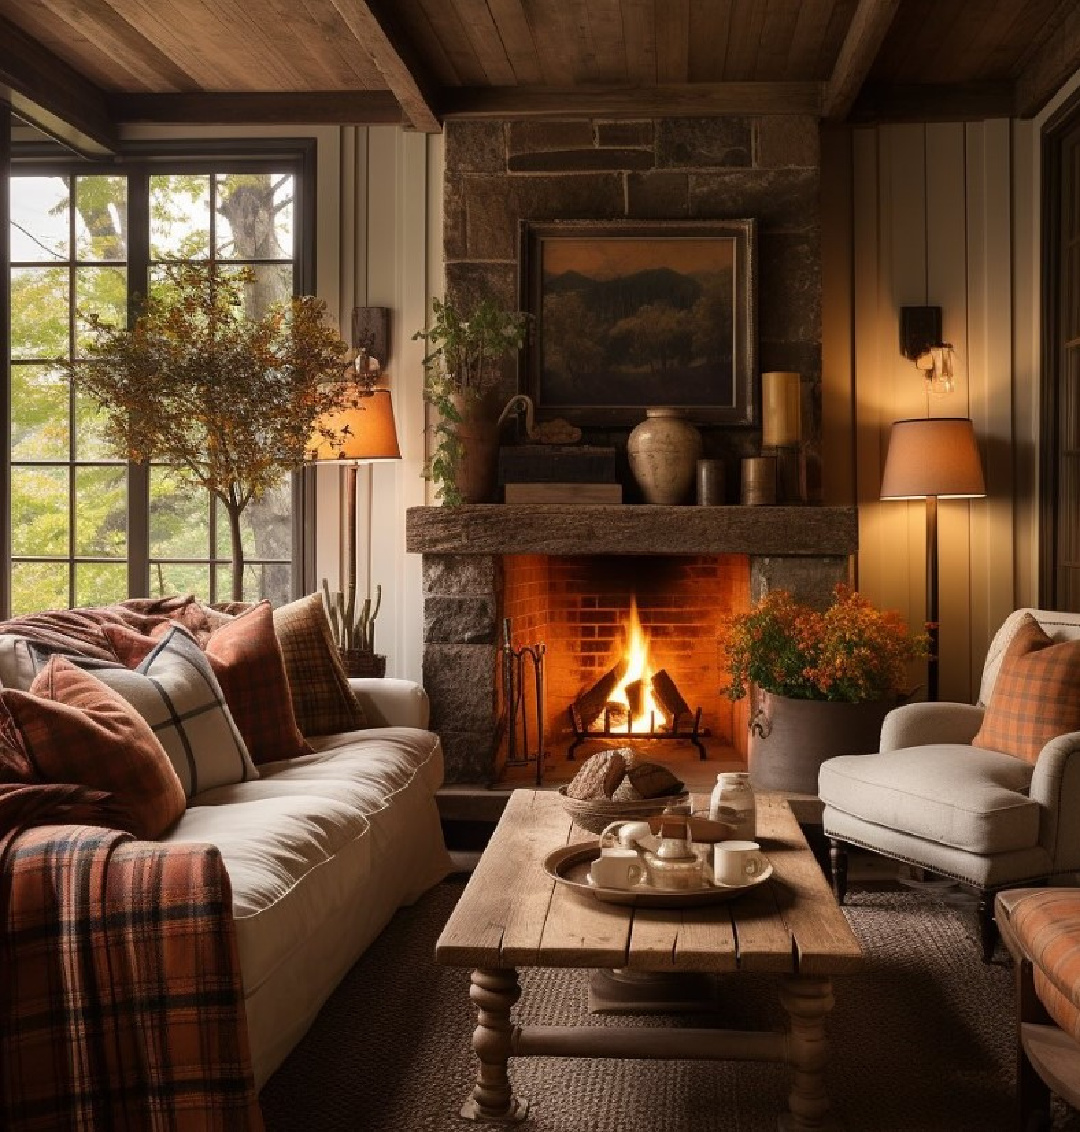 Warm cozy autumnal mood in an AI designed family room with fireplace - @caldwellandcastello. #aidesign #aiinteriors